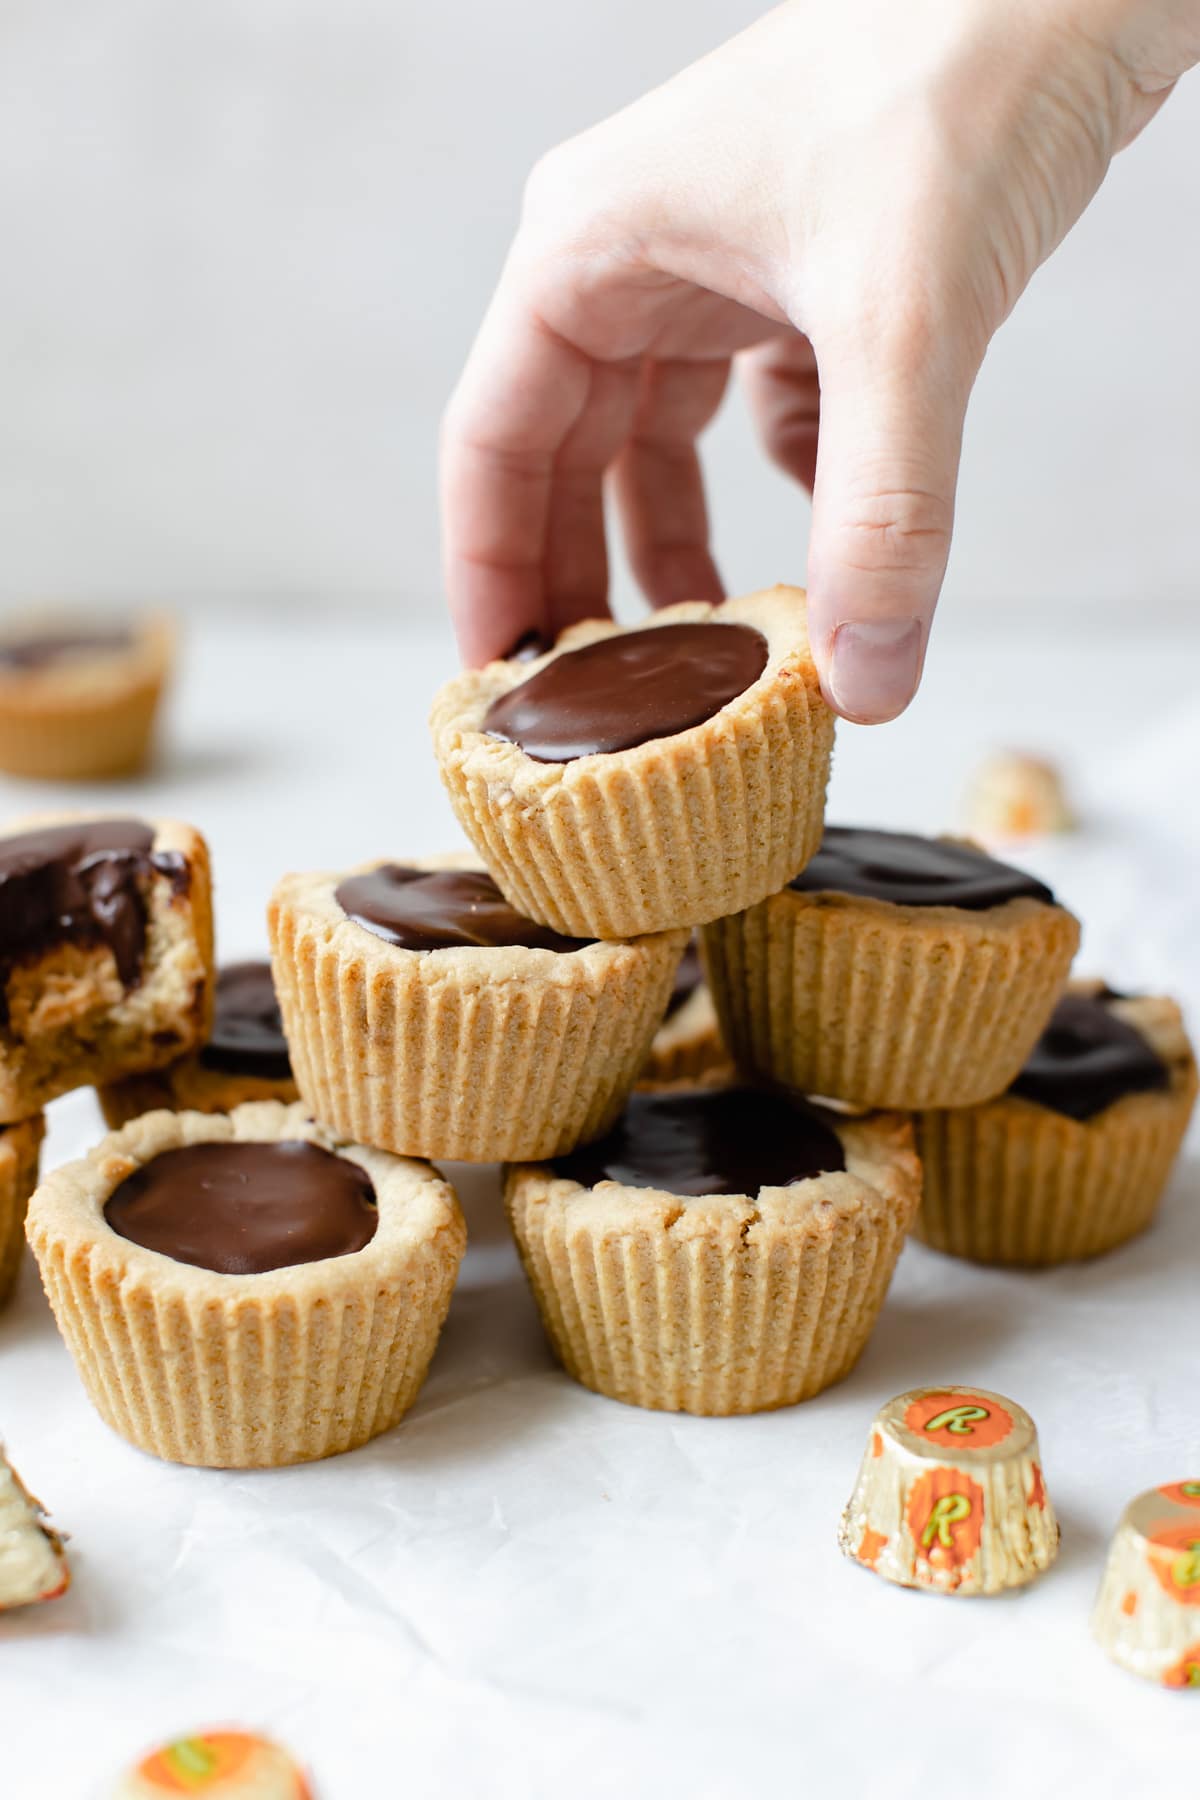 a woman's hand picking up a peanut butter cup cookie